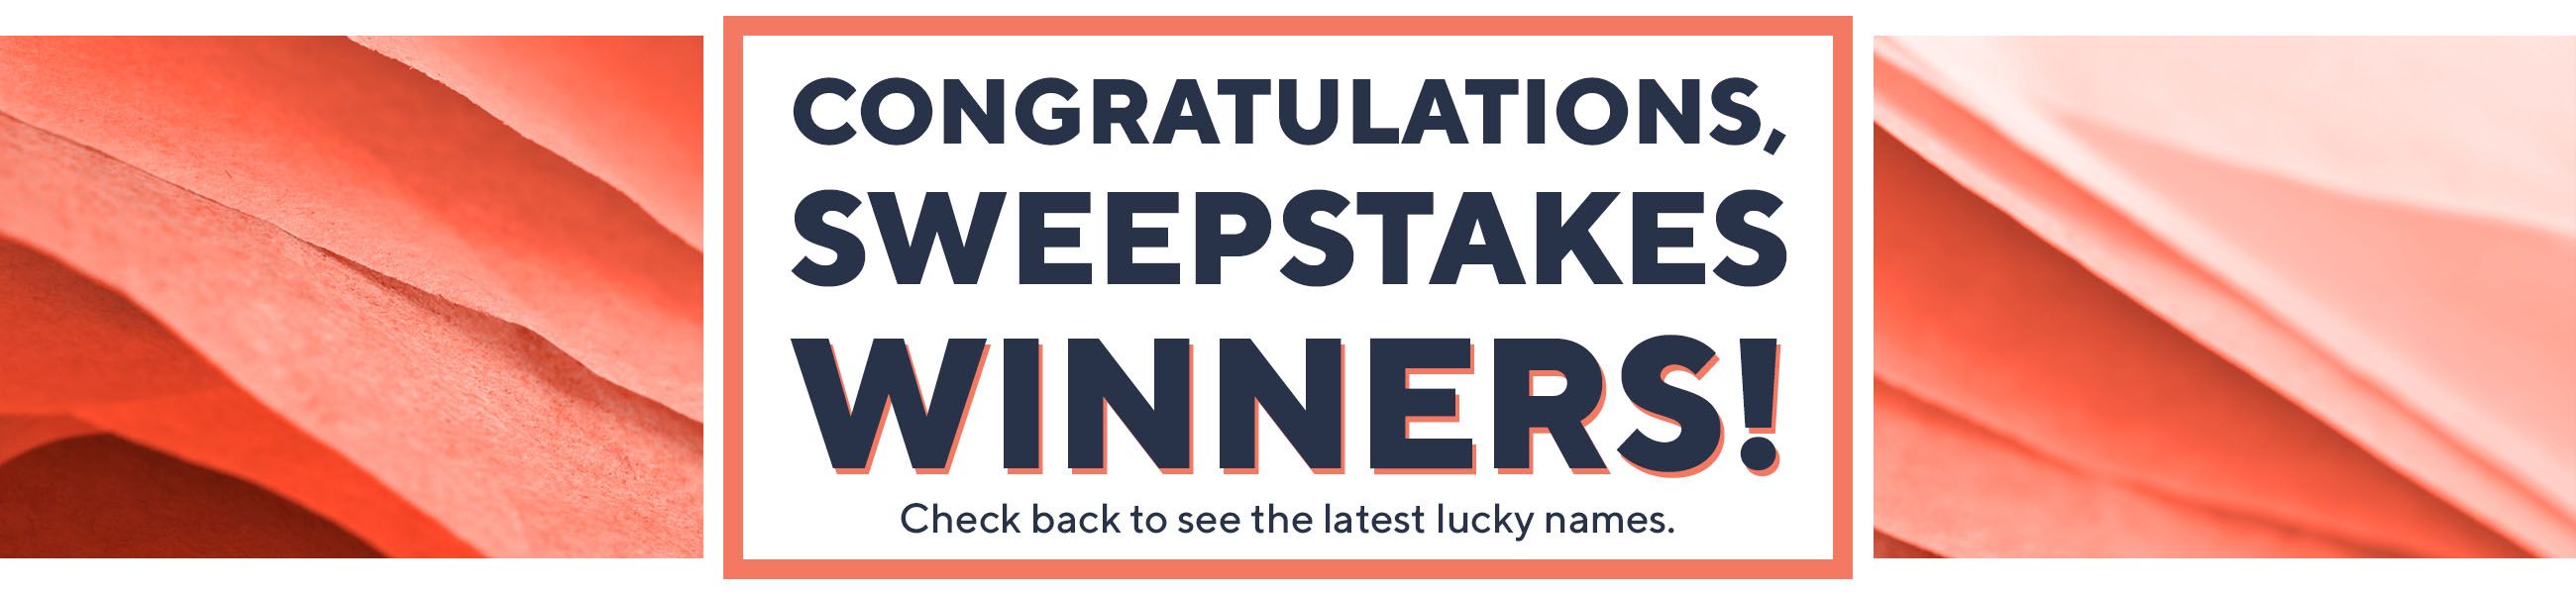 Congratulations, Sweepstakes Winners! Check back to see the latest lucky names